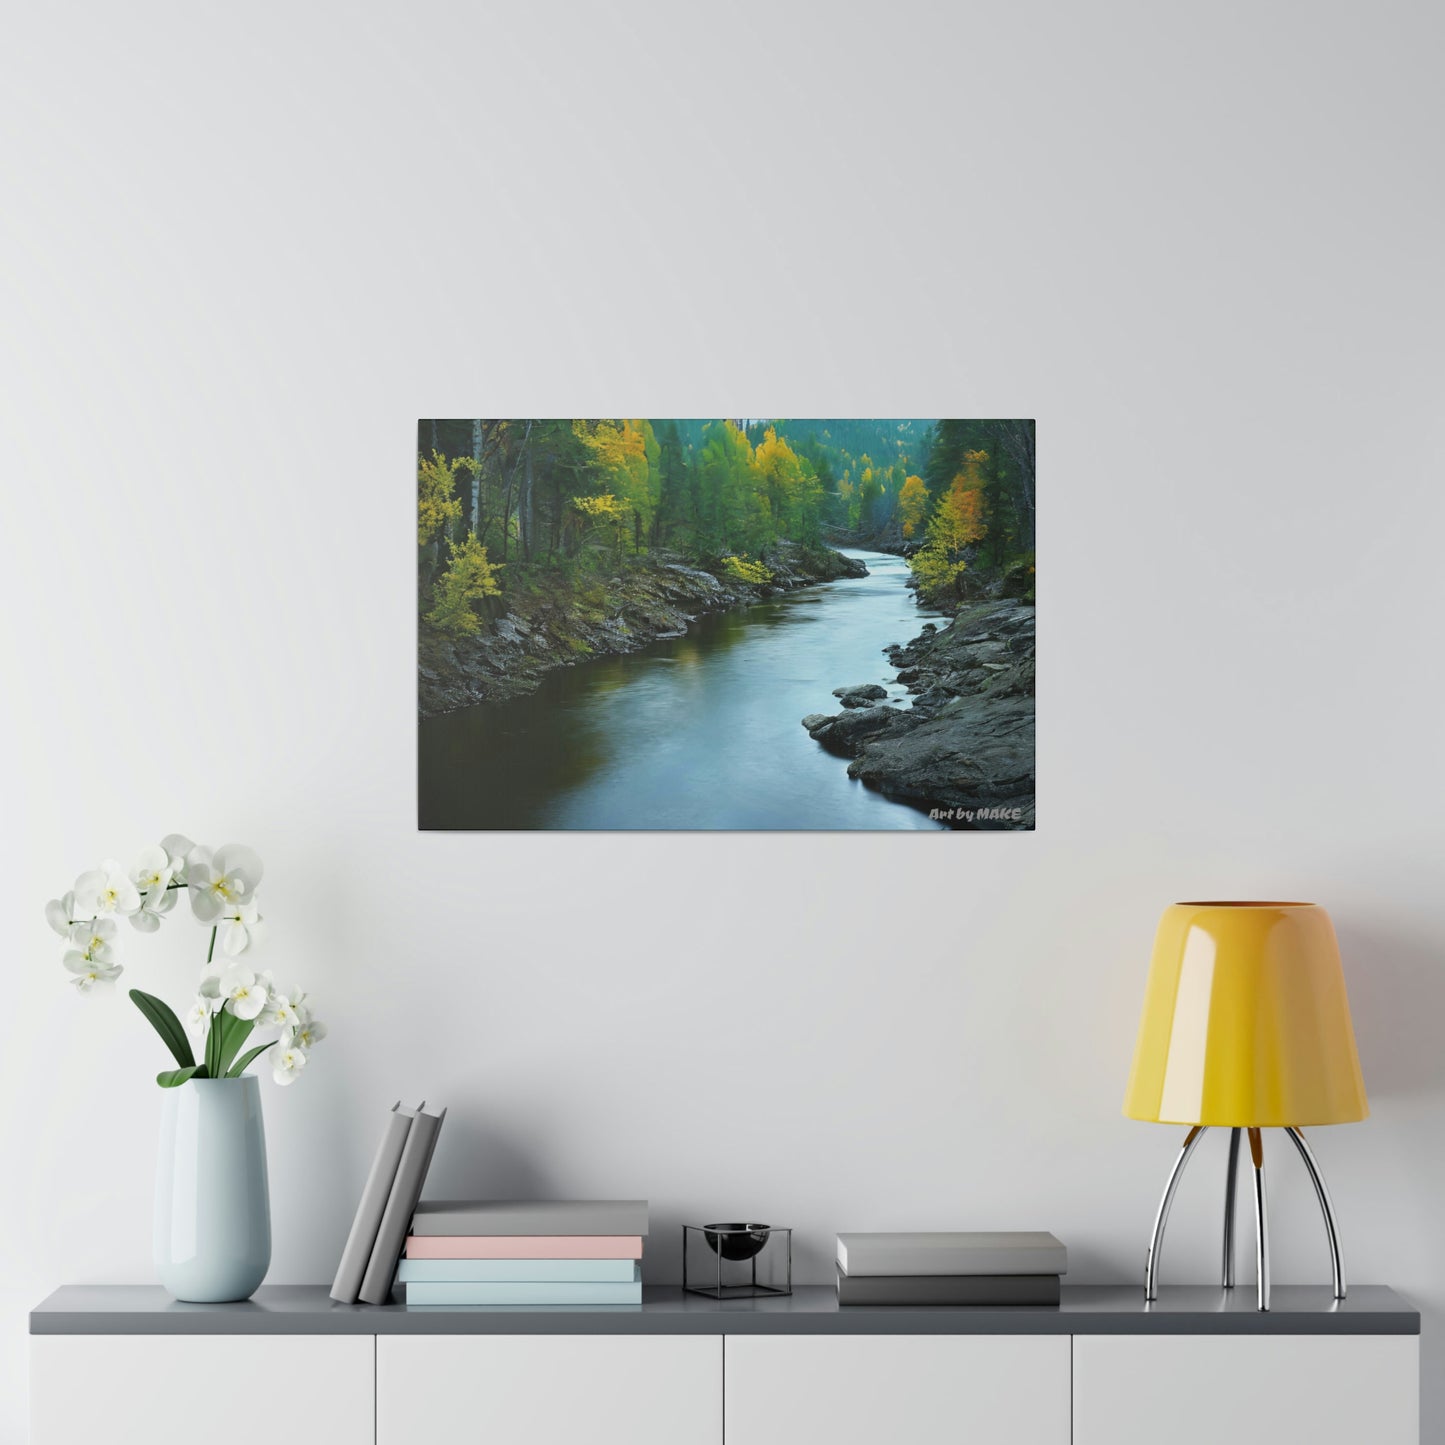 American Nature Streams 1 - 24"x16" Matte Canvas, Stretched, 0.75"